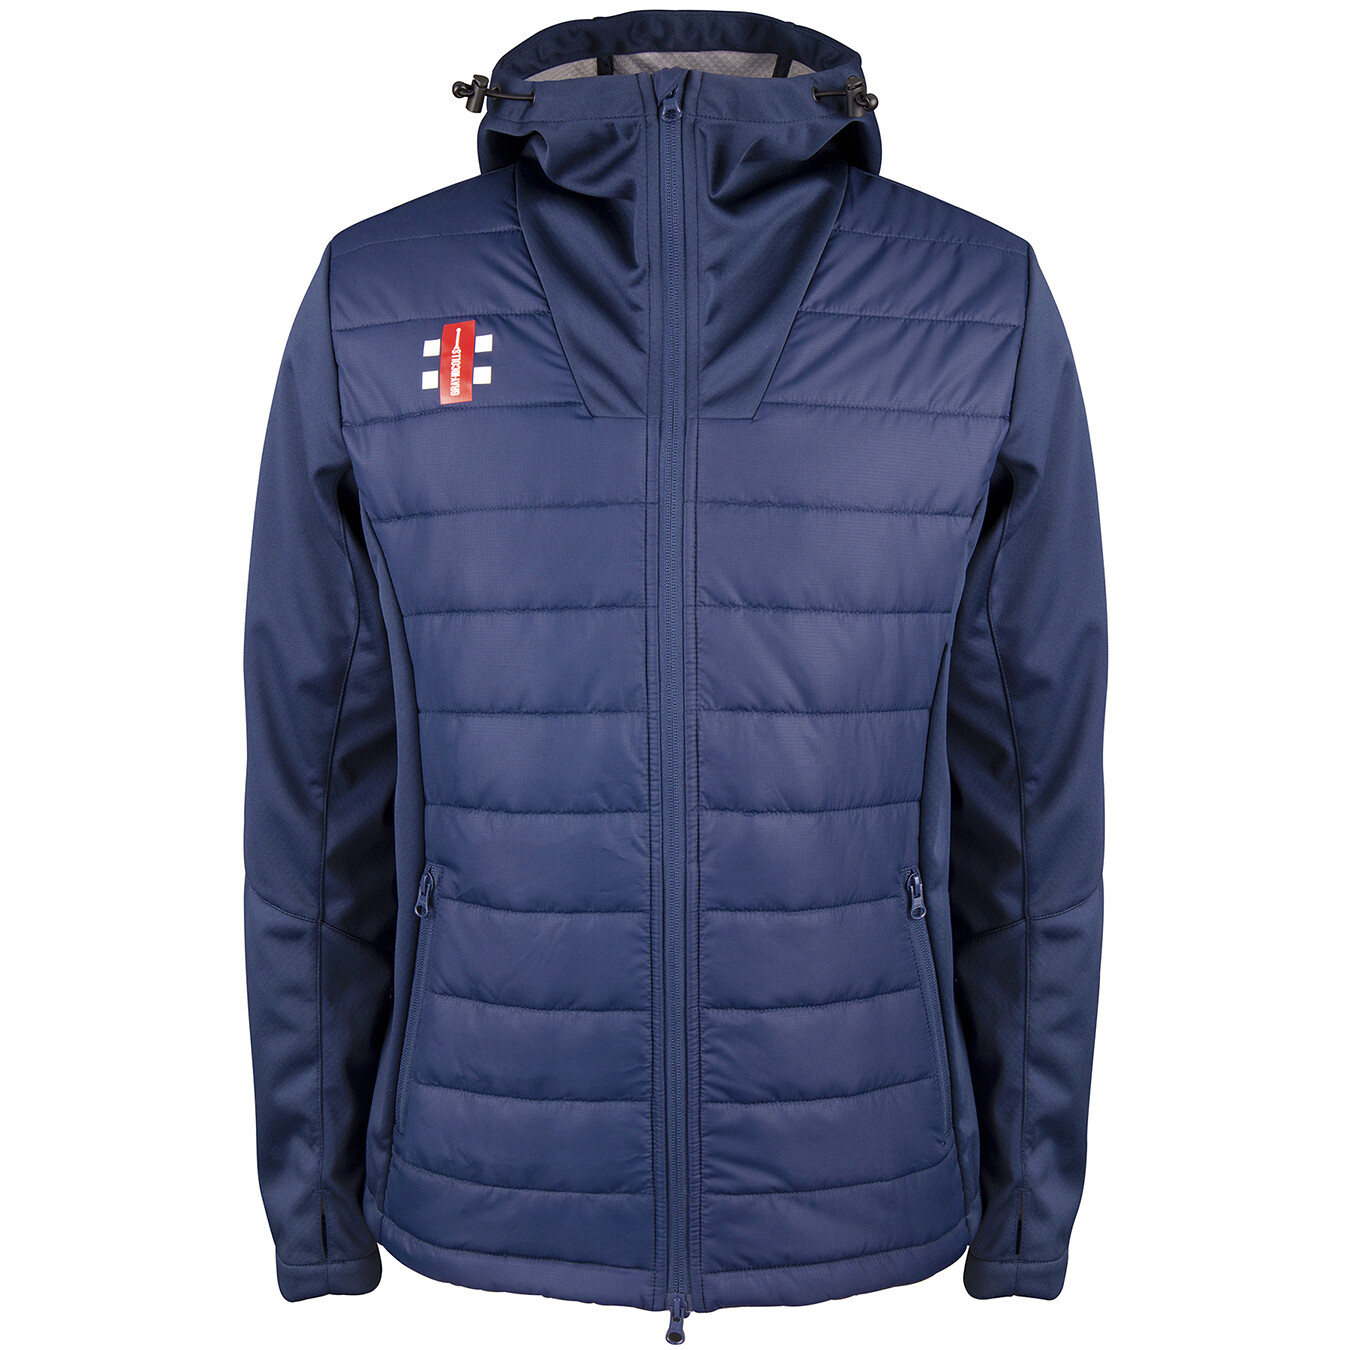 Maltby Pro Performance Outdoor Jacket